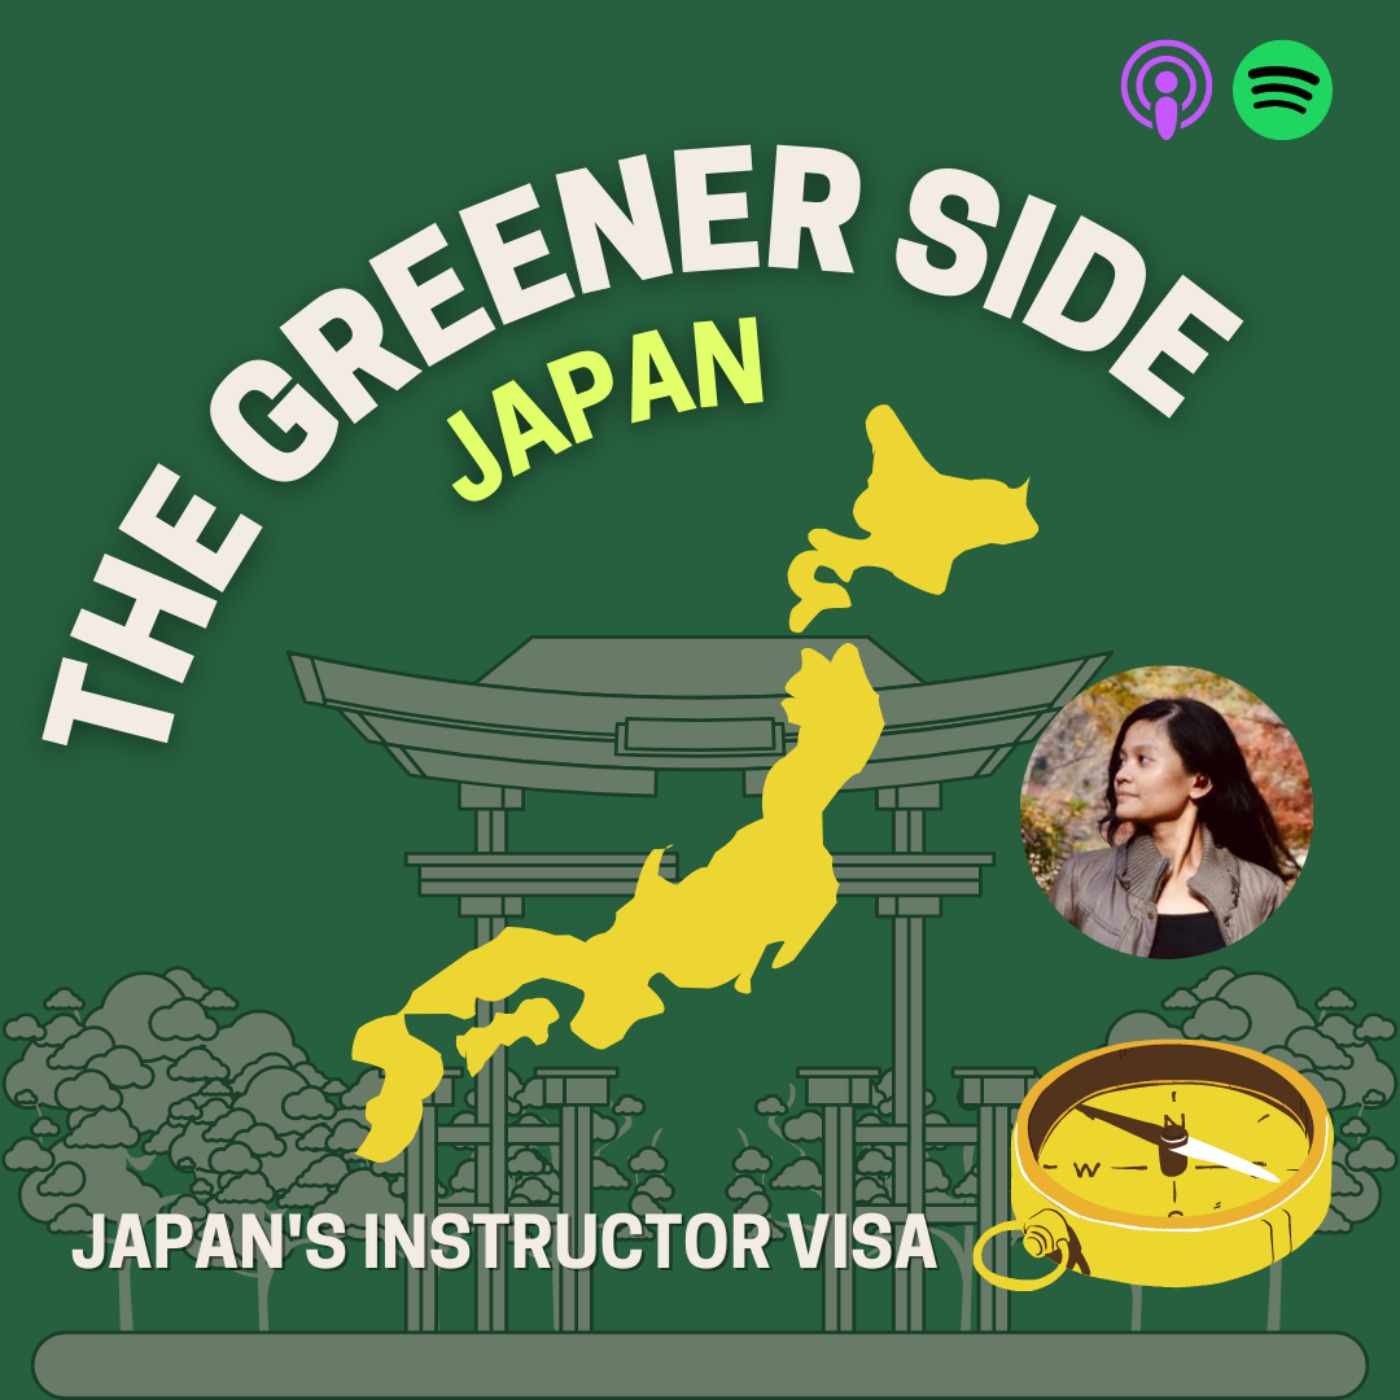 Japan's instructor visa is within your reach!